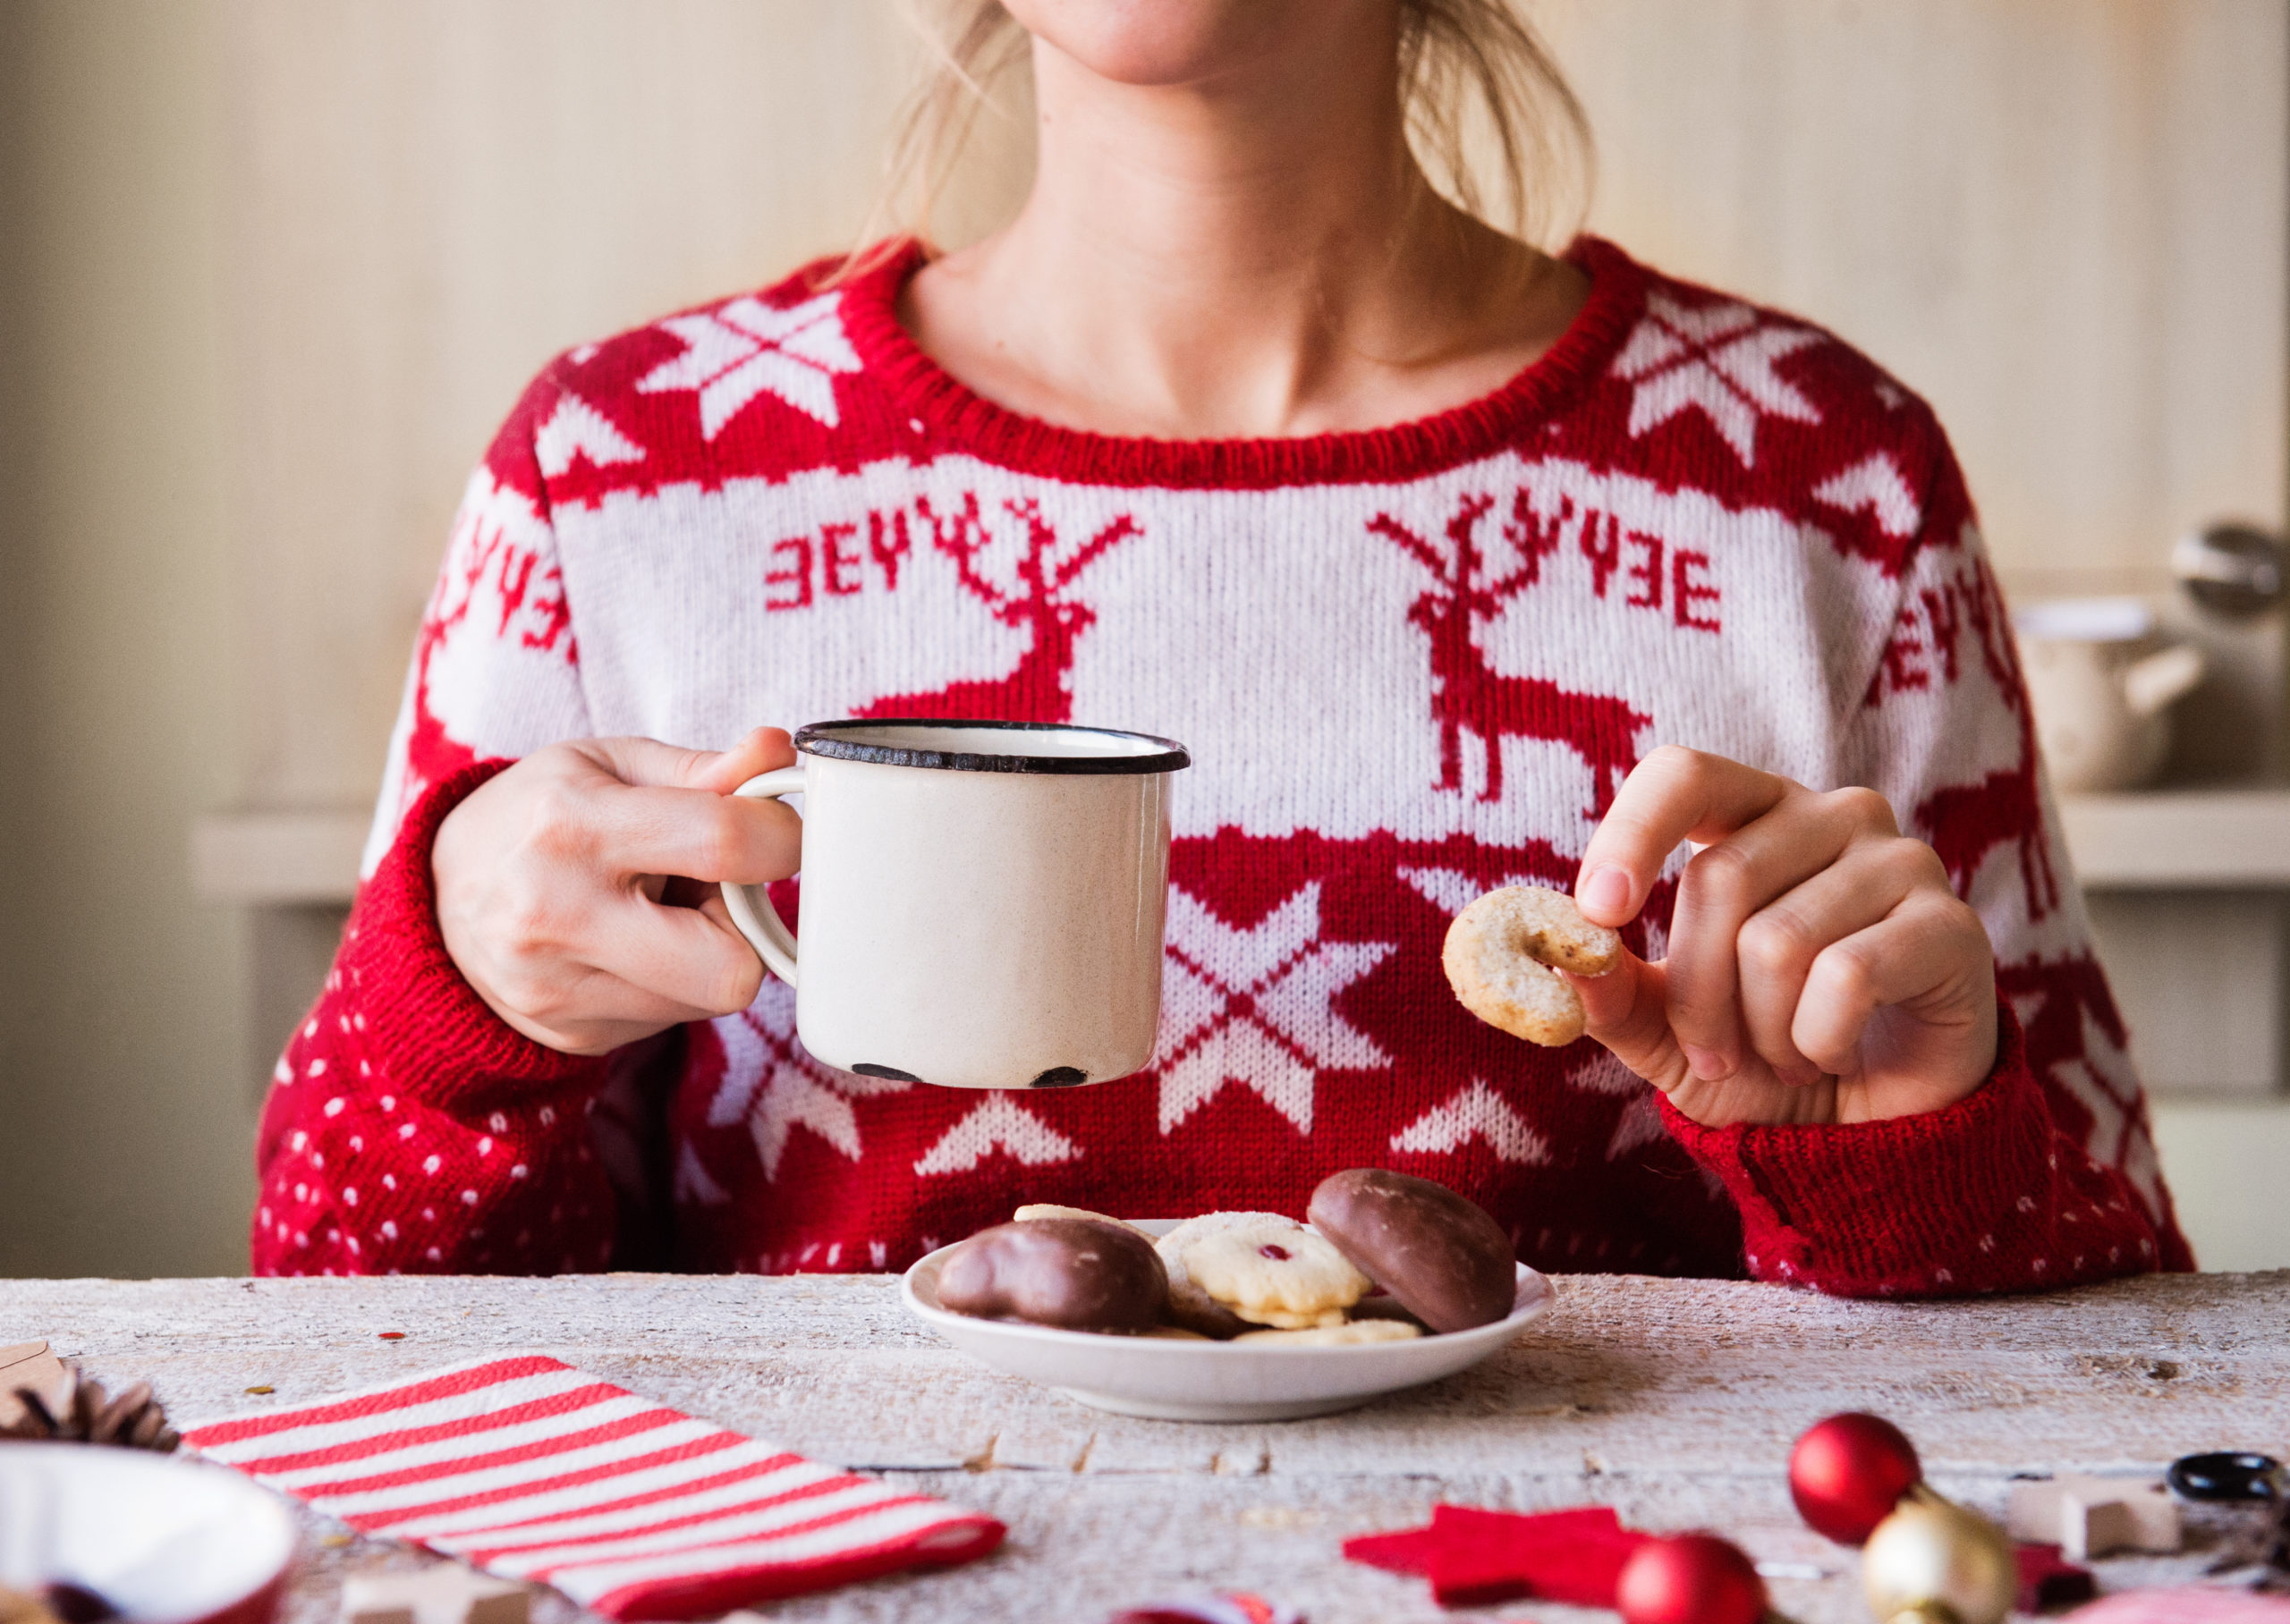 Woman wearing a holiday sweater eating biscuits and drinking coffee.